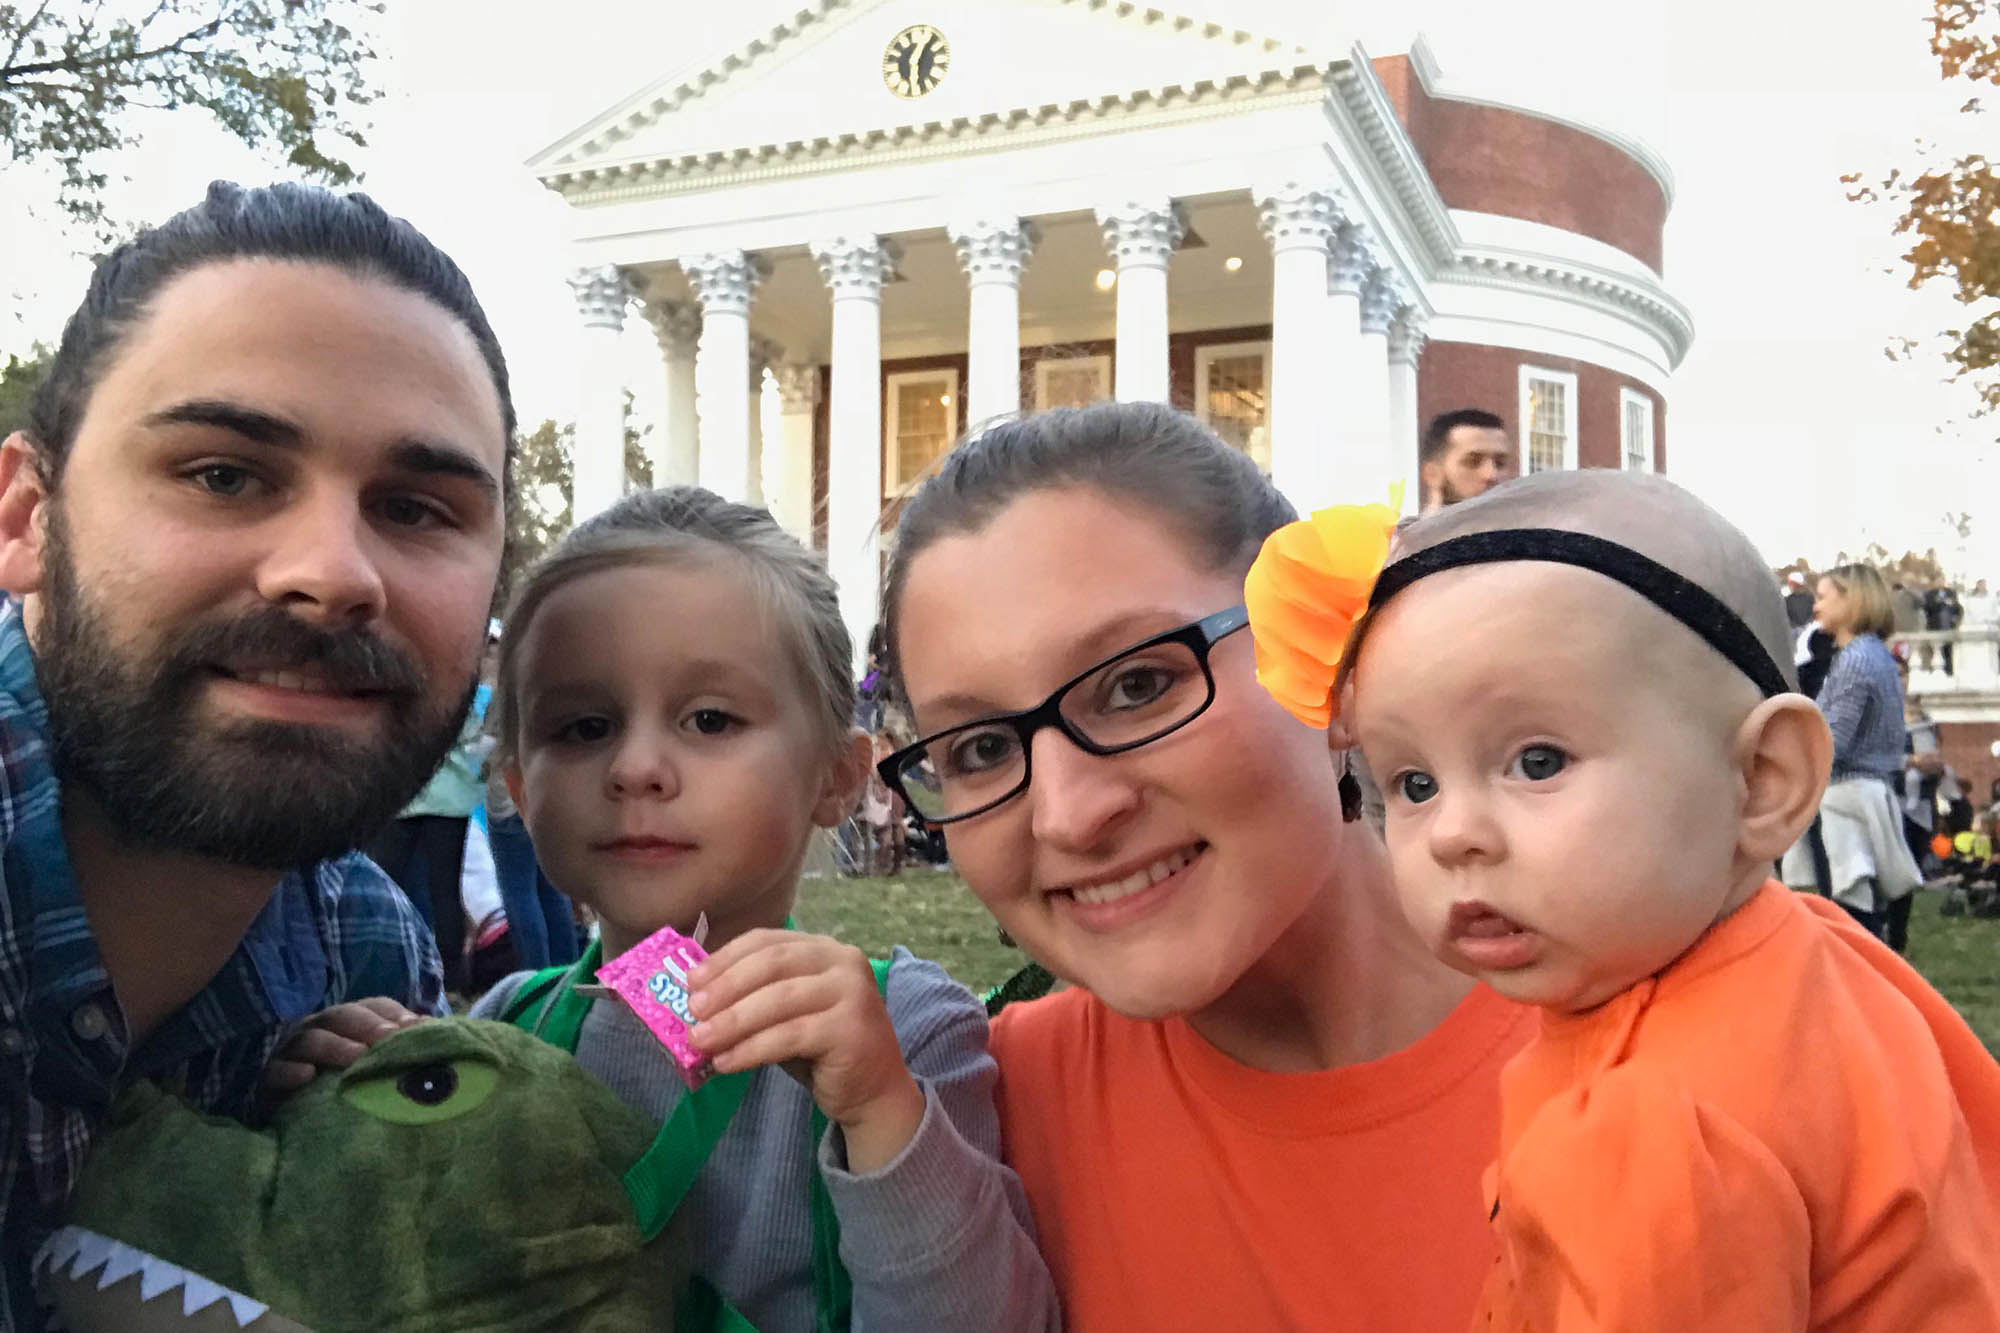 Casedy Thomas, second from right, with her husband, Matthew, and their two children, in front of the Rotunda